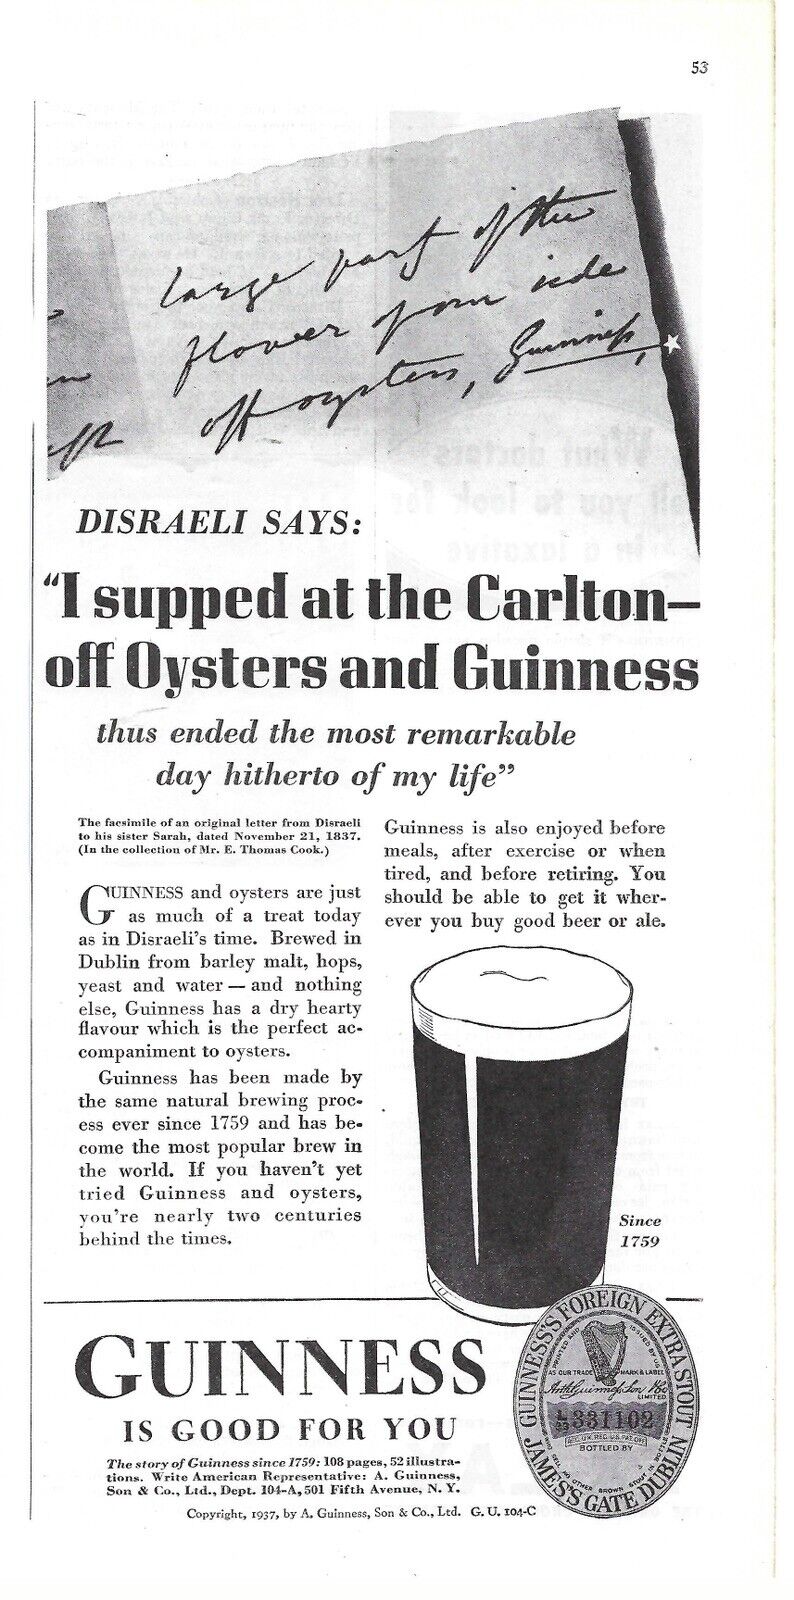 1937 Guinness Carlton Off Oysters & Guinness Vintage Magazine Print Ad/Poster